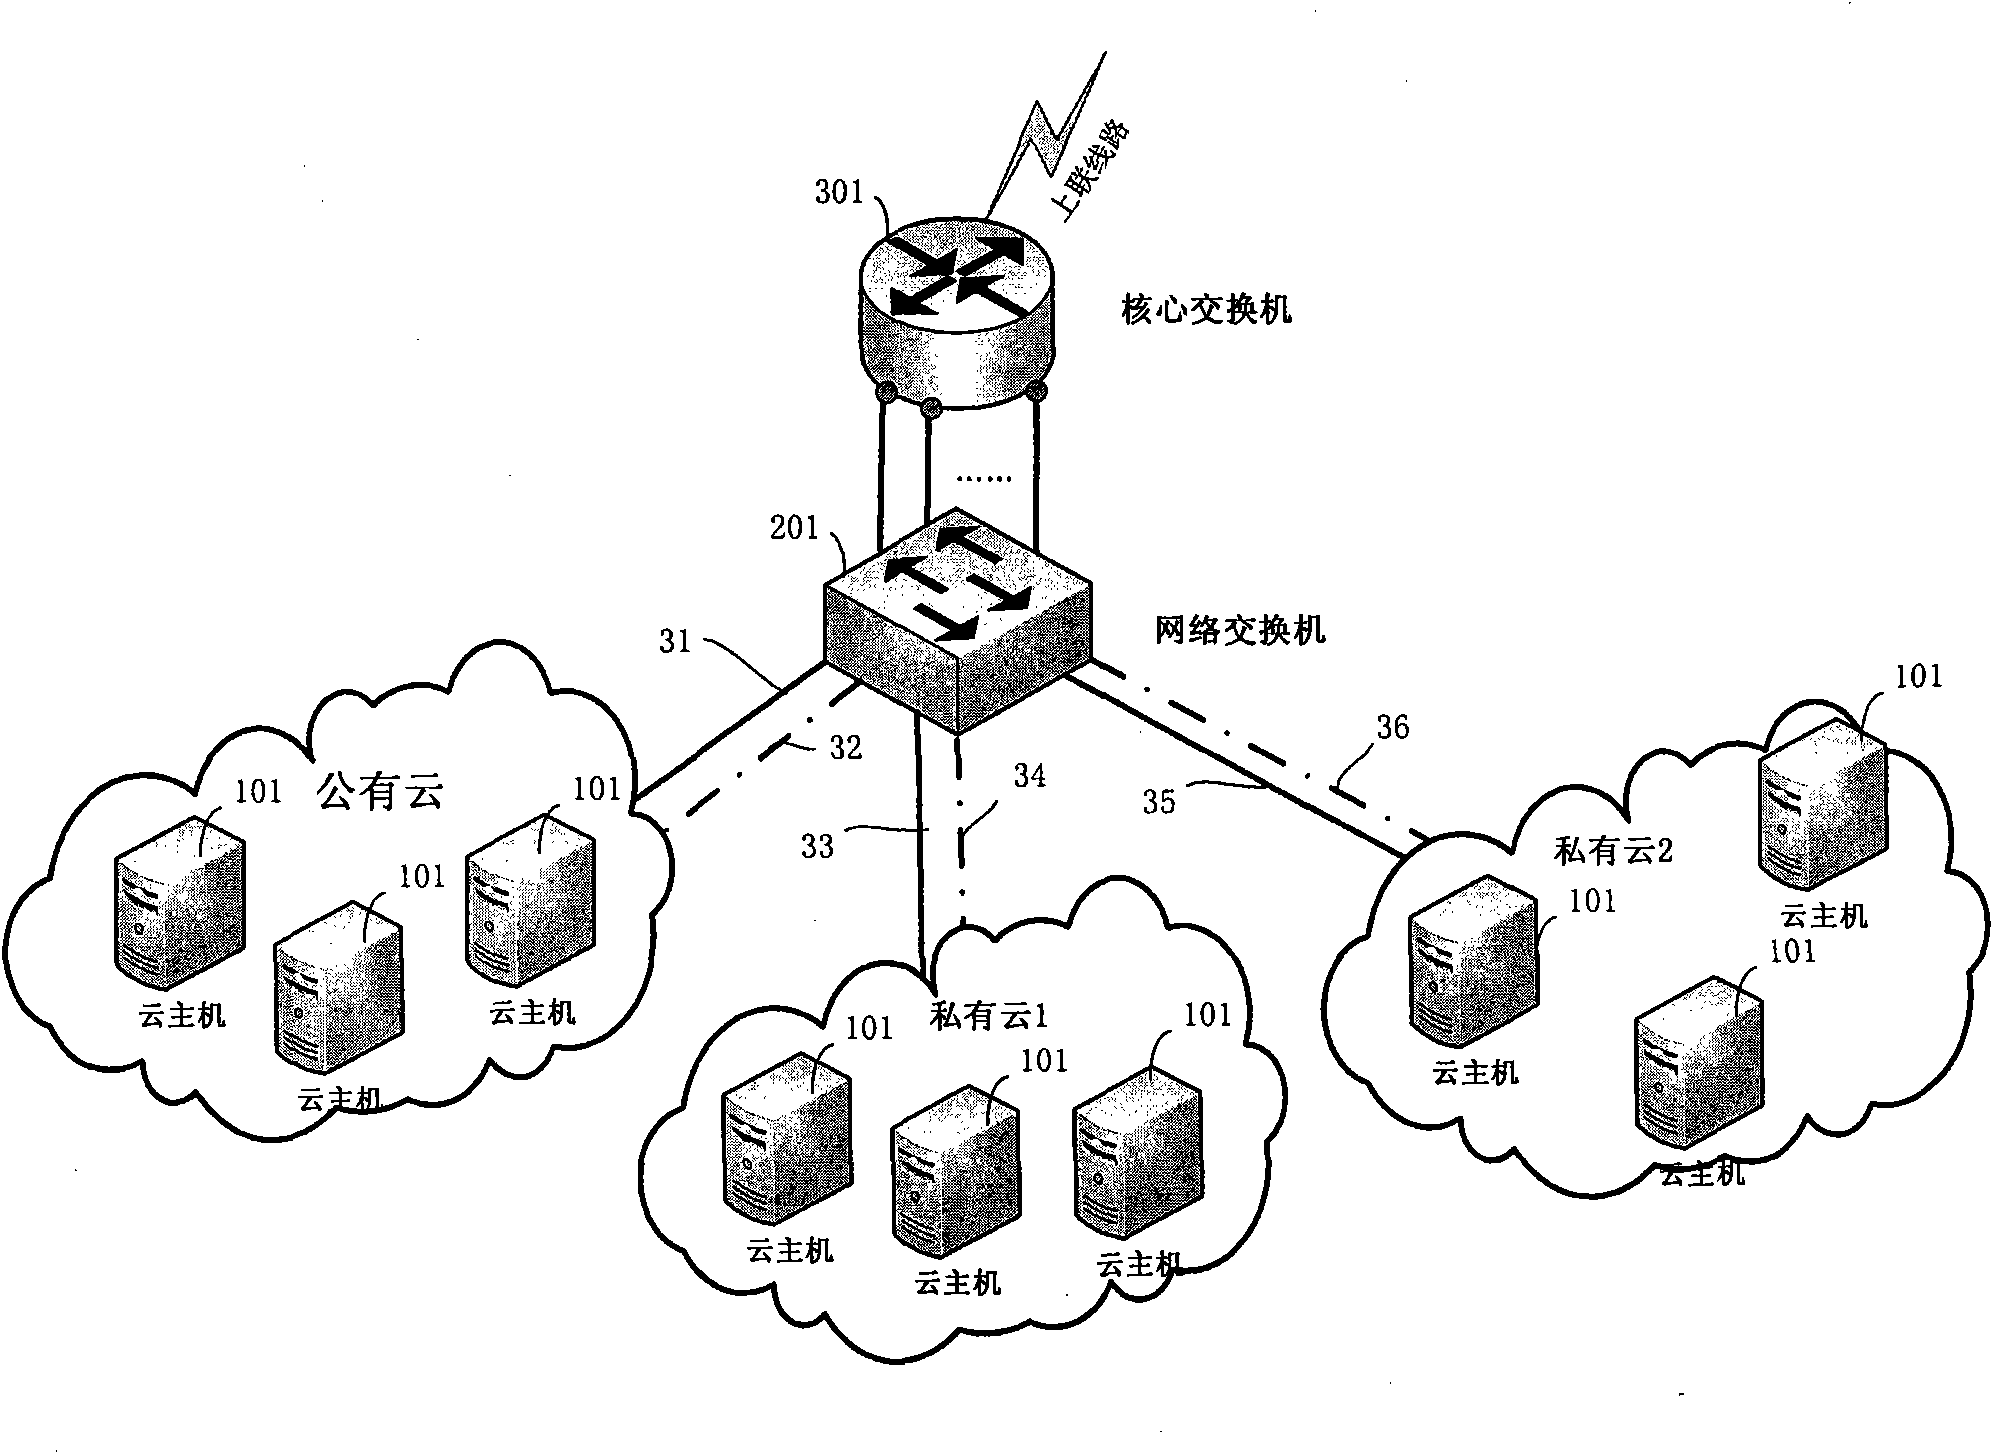 Virtual local area network-based speed limiting method and system for cloud hosts